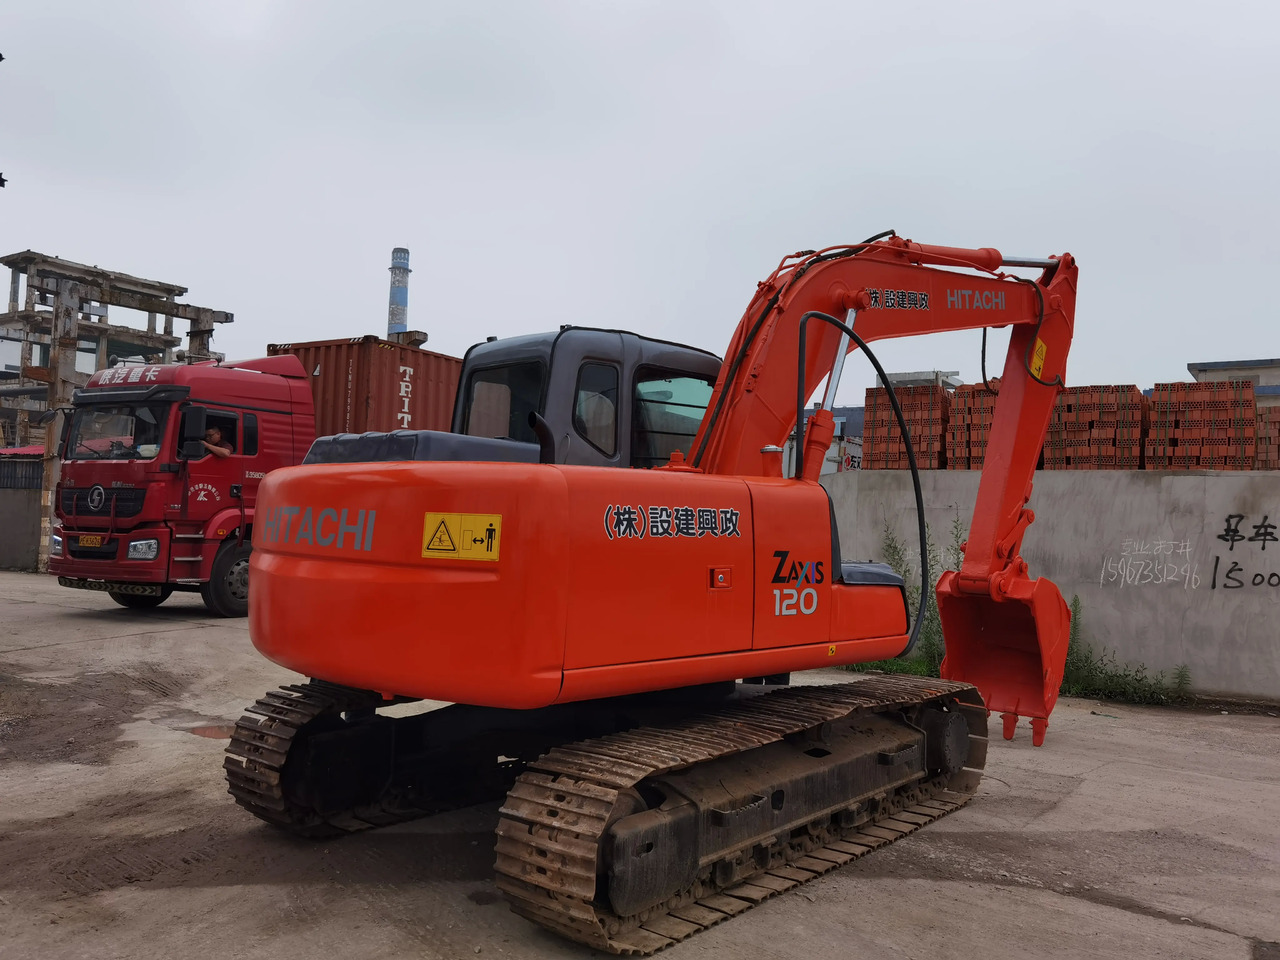 Crawler excavator cheap used hitachi ZX120 excavator used excavators japan used excavator machine in stock now: picture 3